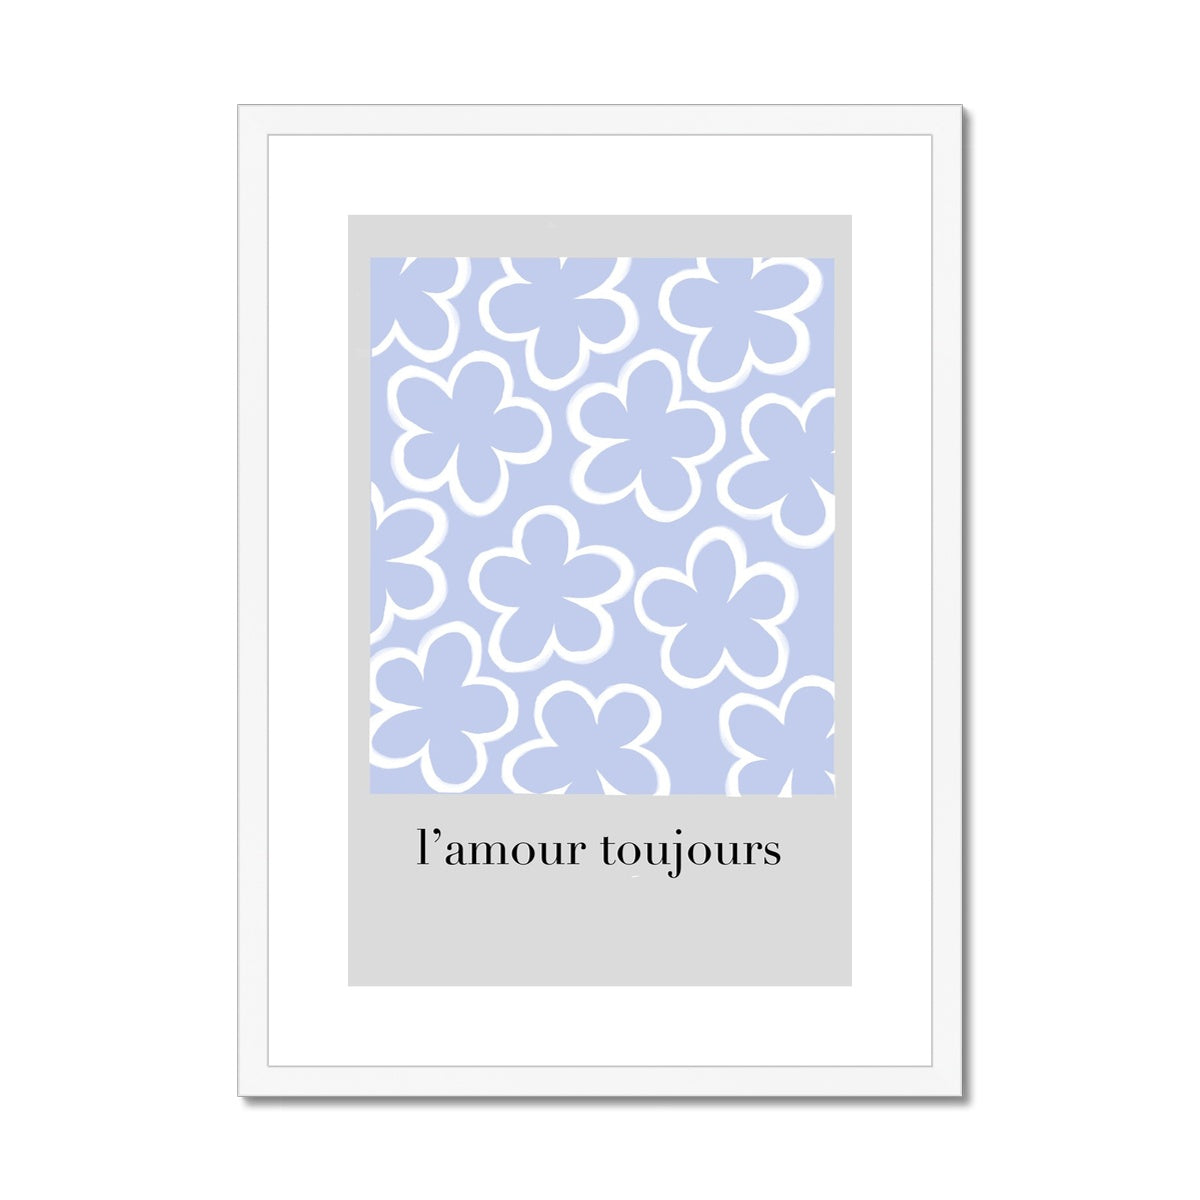 fleurs / l'amour toujours Framed & Mounted Print